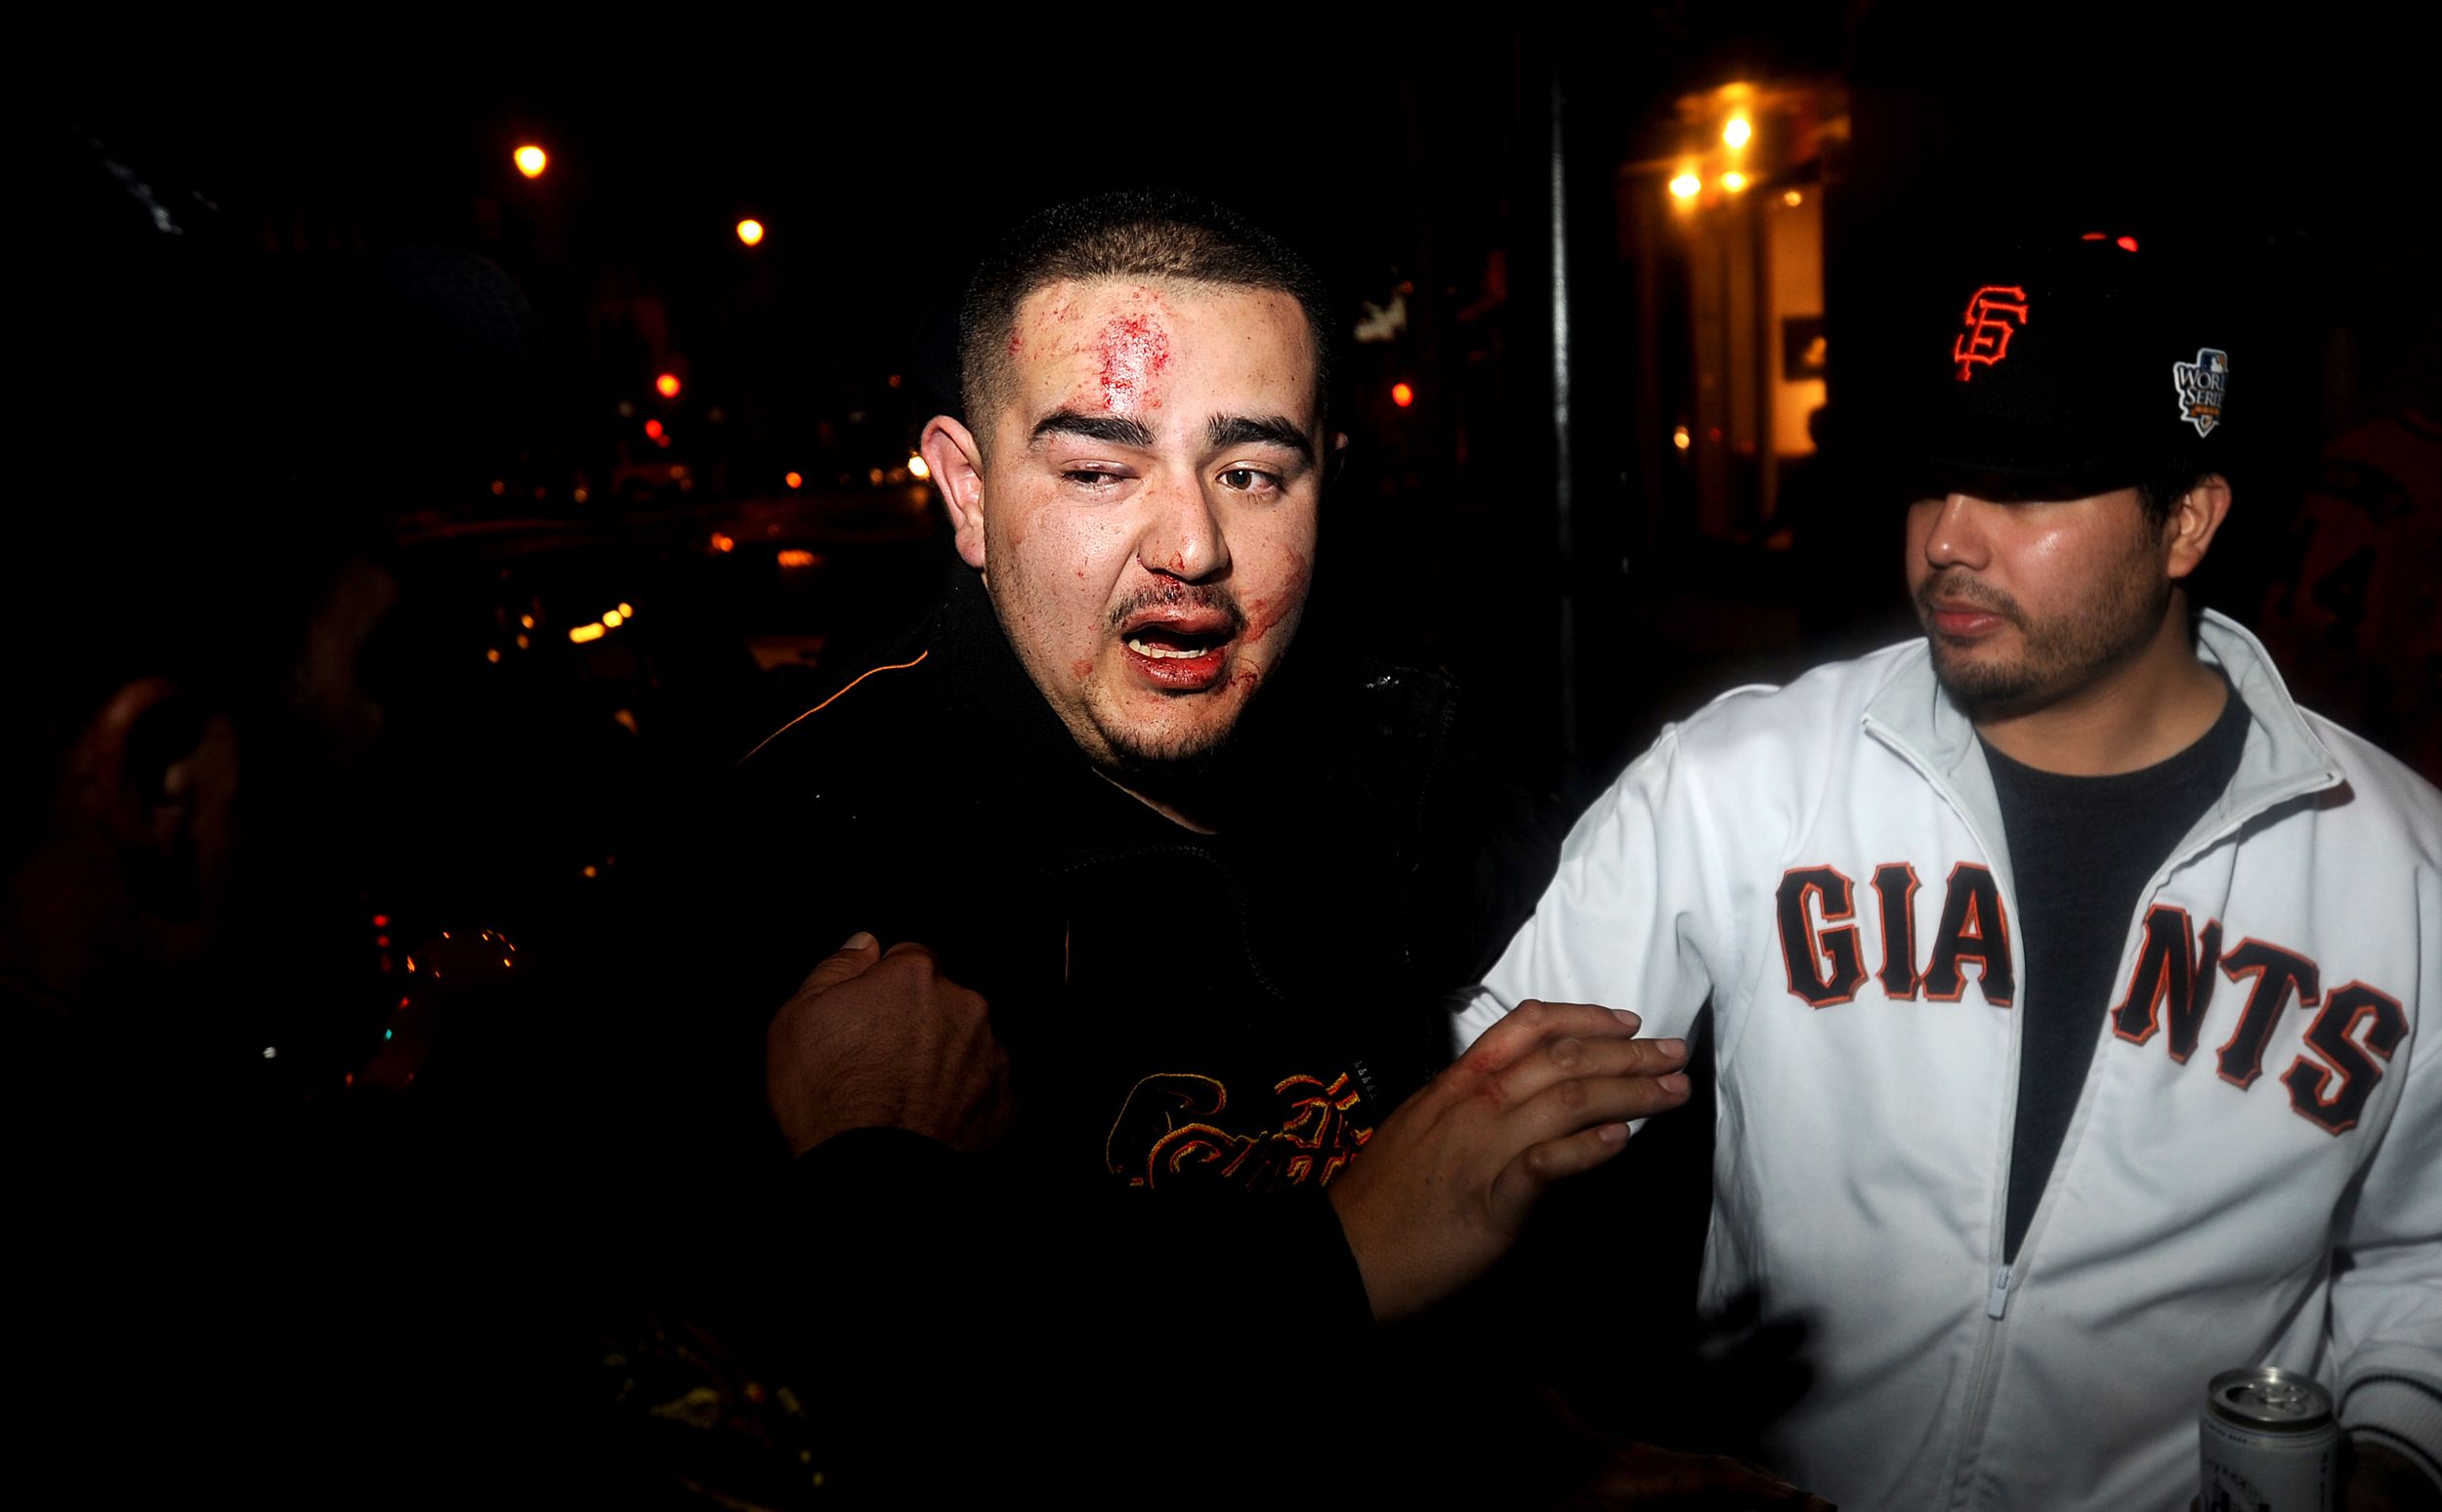 Giddy fans celebrate like crazy over the San Francisco Giants